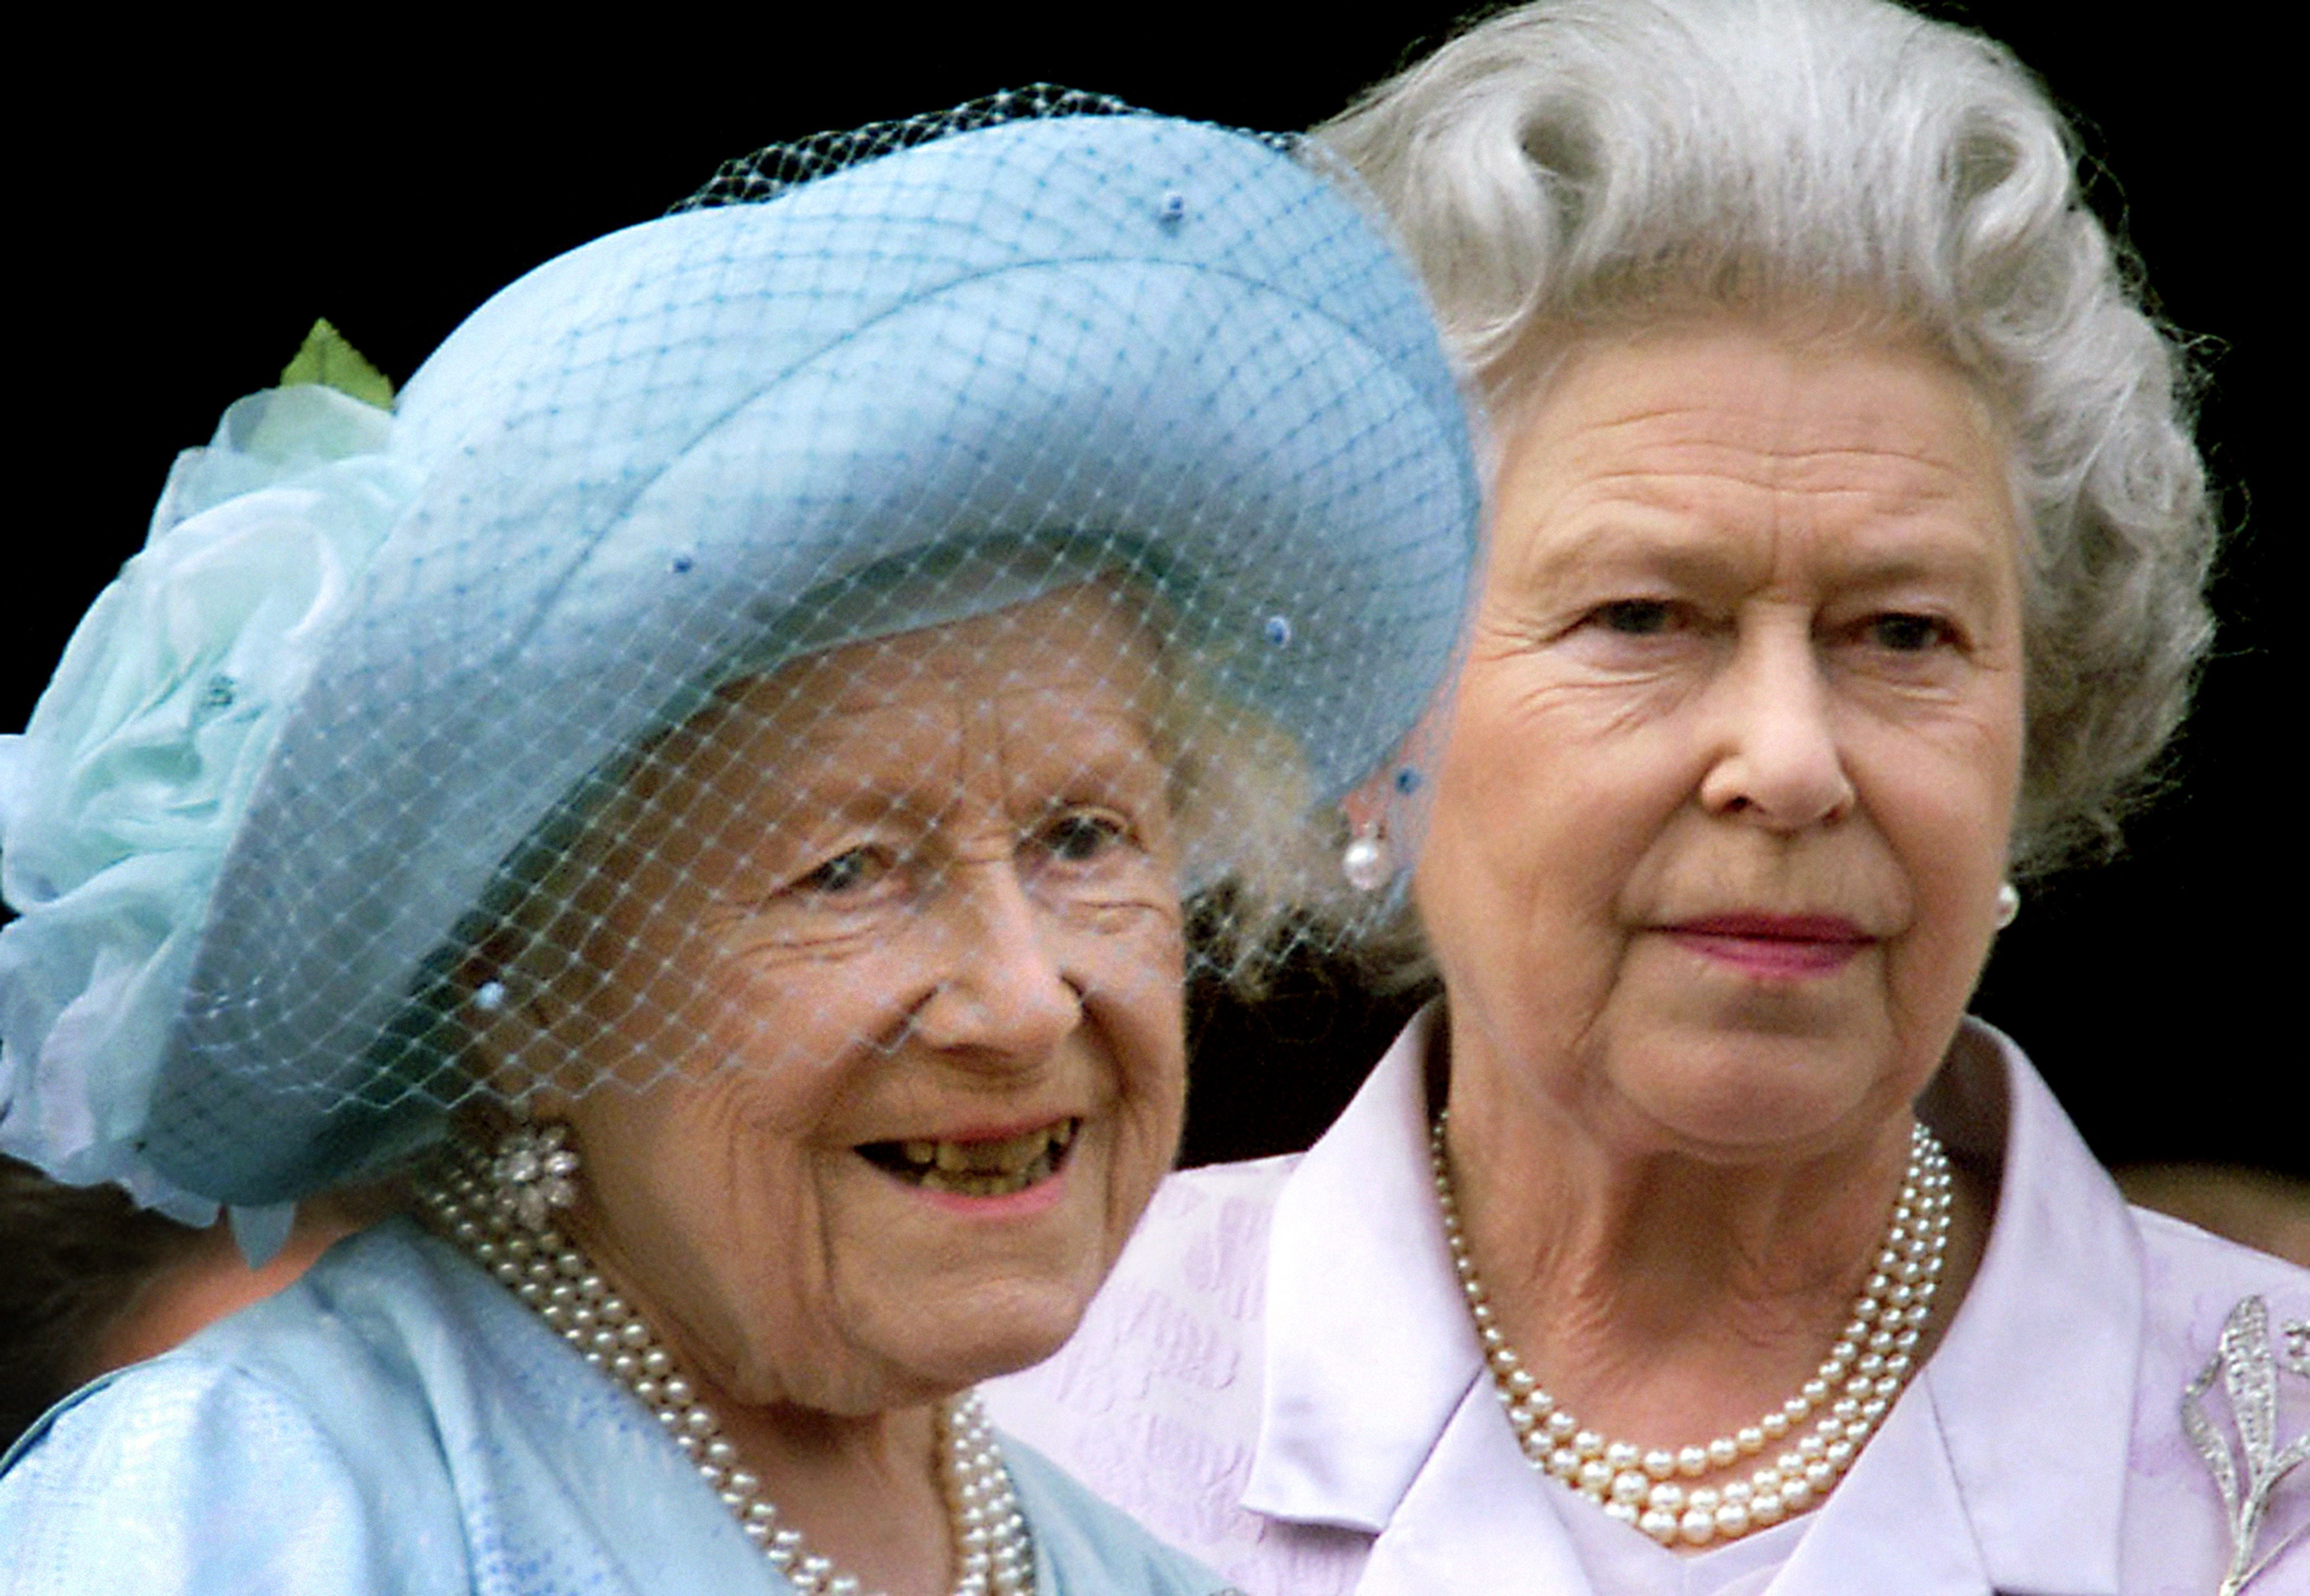 Queen Elizabeth The Queen Mother celebrating her 100th birthday from the balcony of Buckingham Palace with her daughter Queen Elizabeth II (PA)